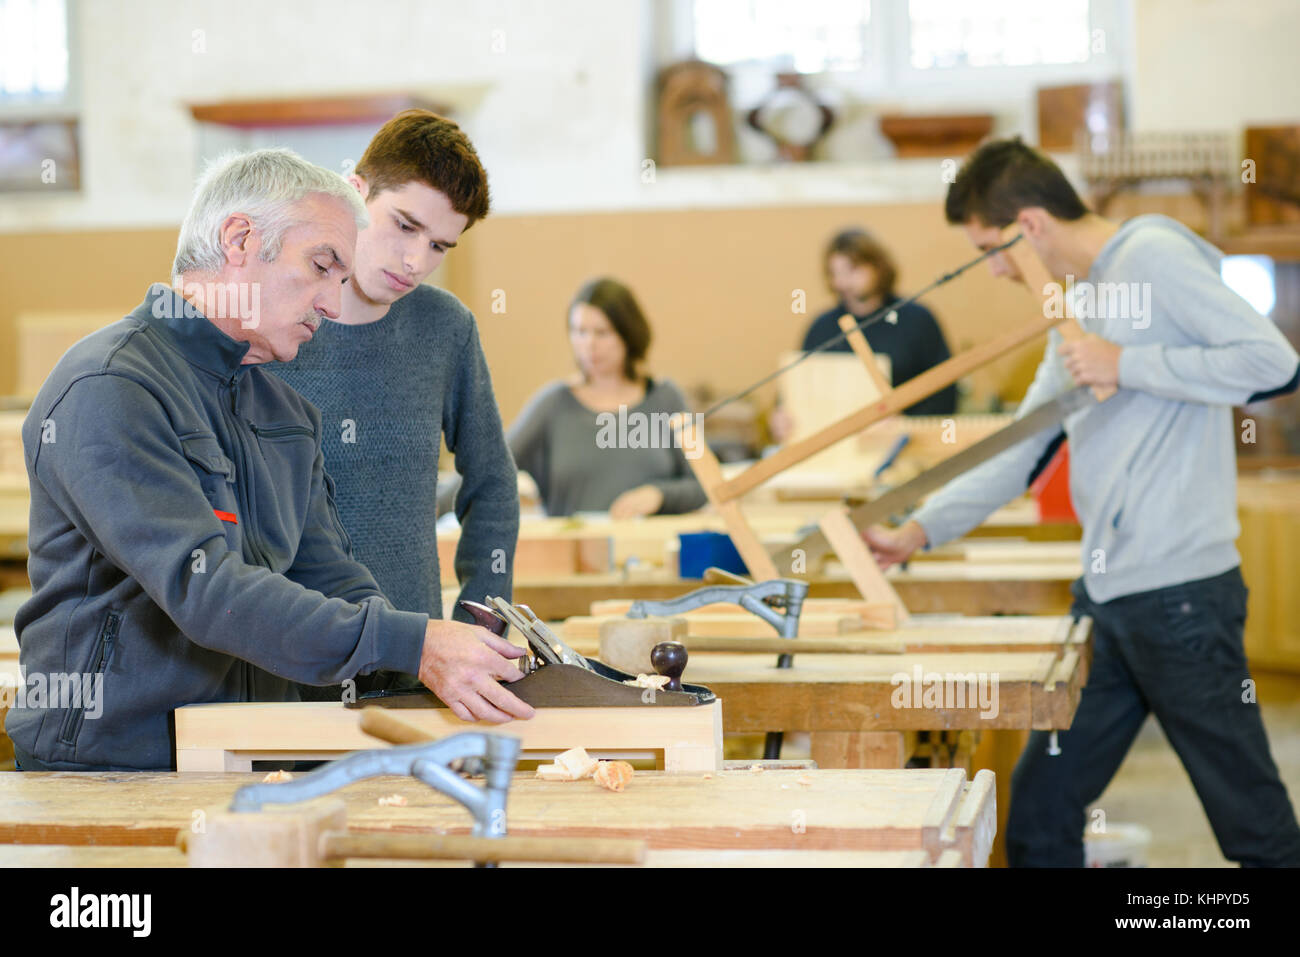 Student And Teacher In Carpentry Class Stock Photo Alamy